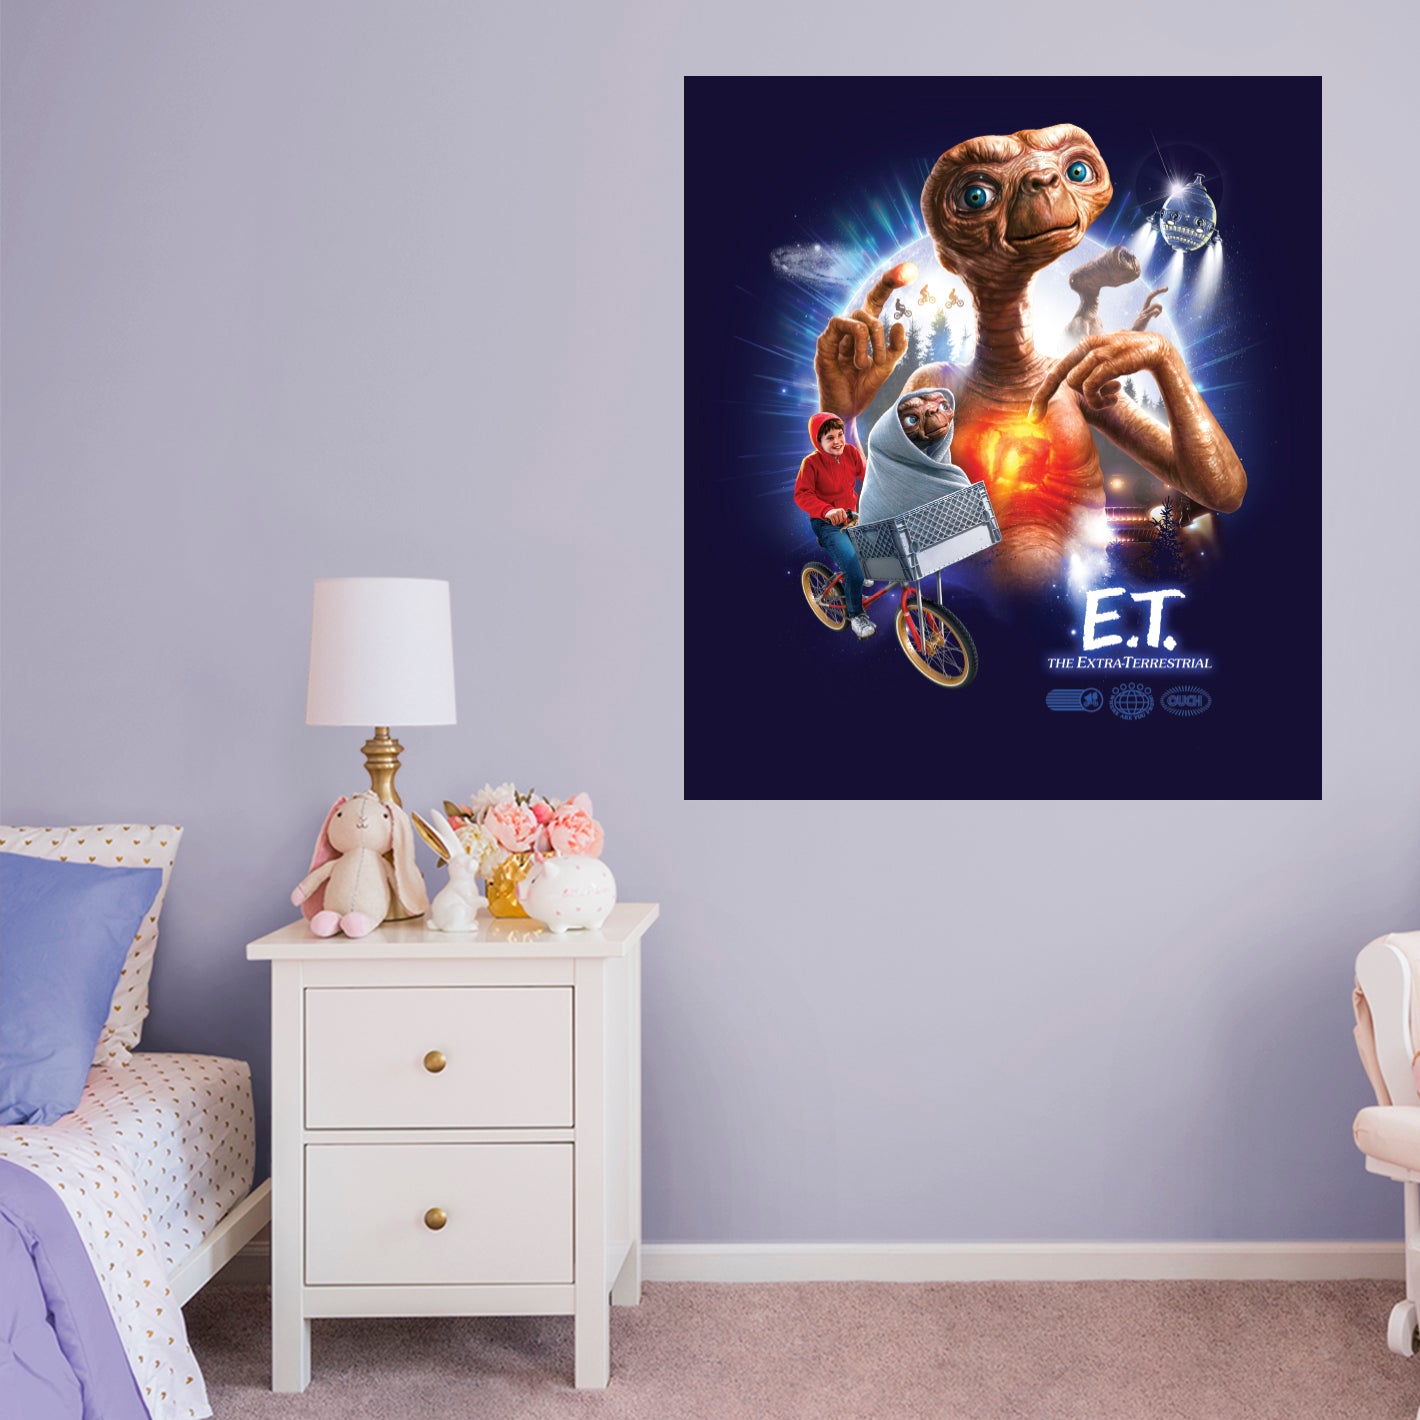 E.T.: E.T. Collage 40th Anniversary Graphic Poster        - Officially Licensed NBC Universal Removable     Adhesive Decal